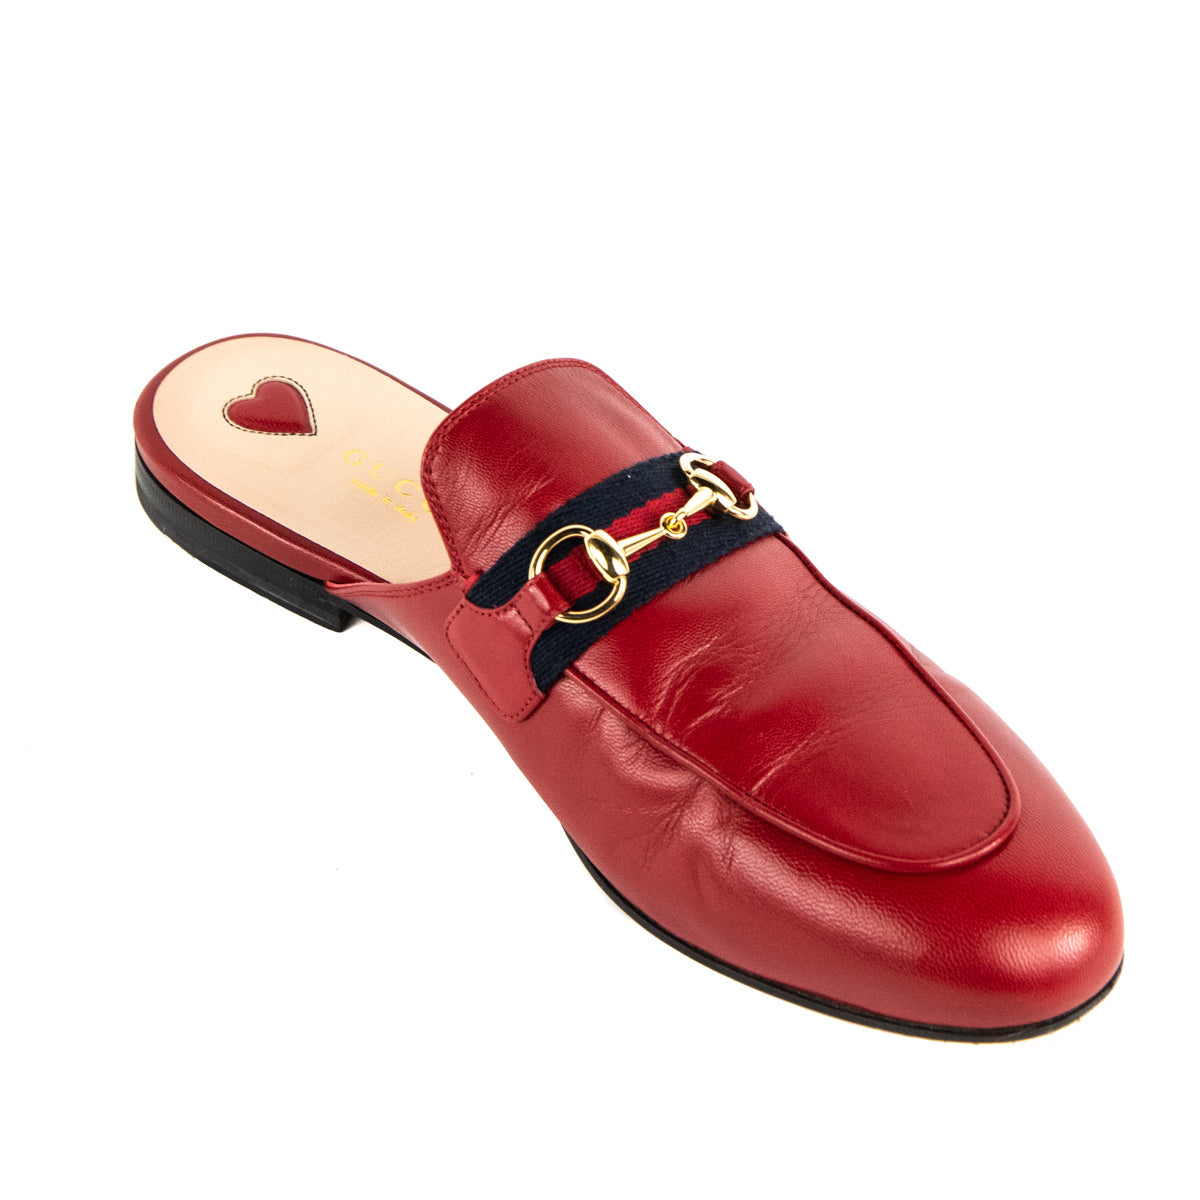 Gucci Red Leather Web Princetown Mules Size US 9 | EU 39 - Love that Bag etc - Preowned Authentic Designer Handbags & Preloved Fashions